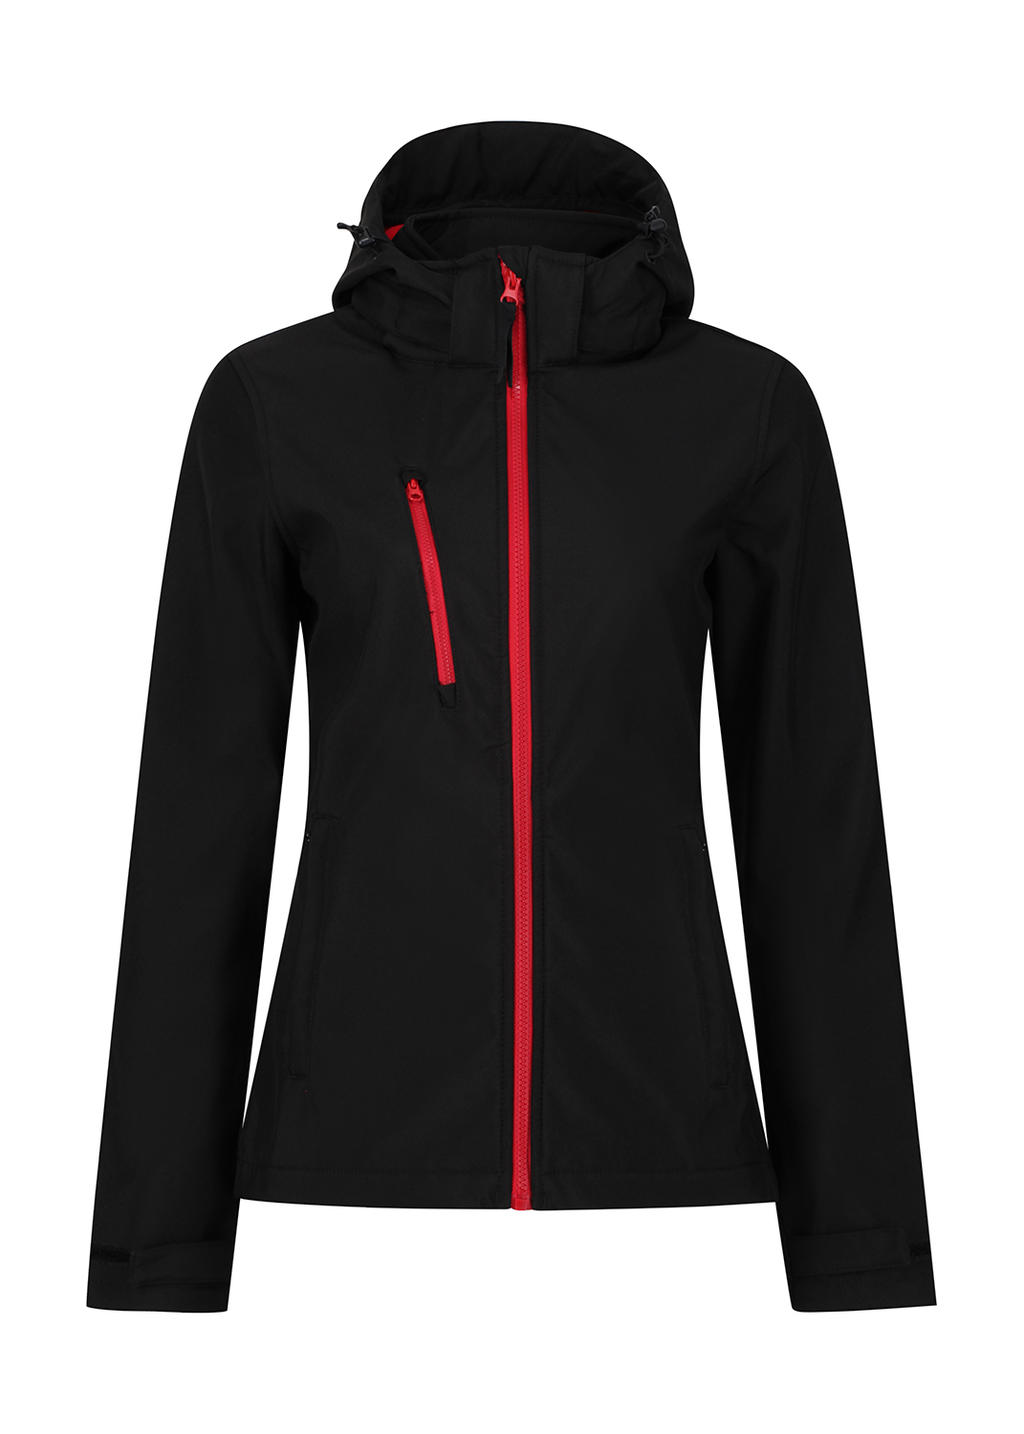  Womens Venturer 3-Layer Hooded Softshell Jacket in Farbe Black/Red